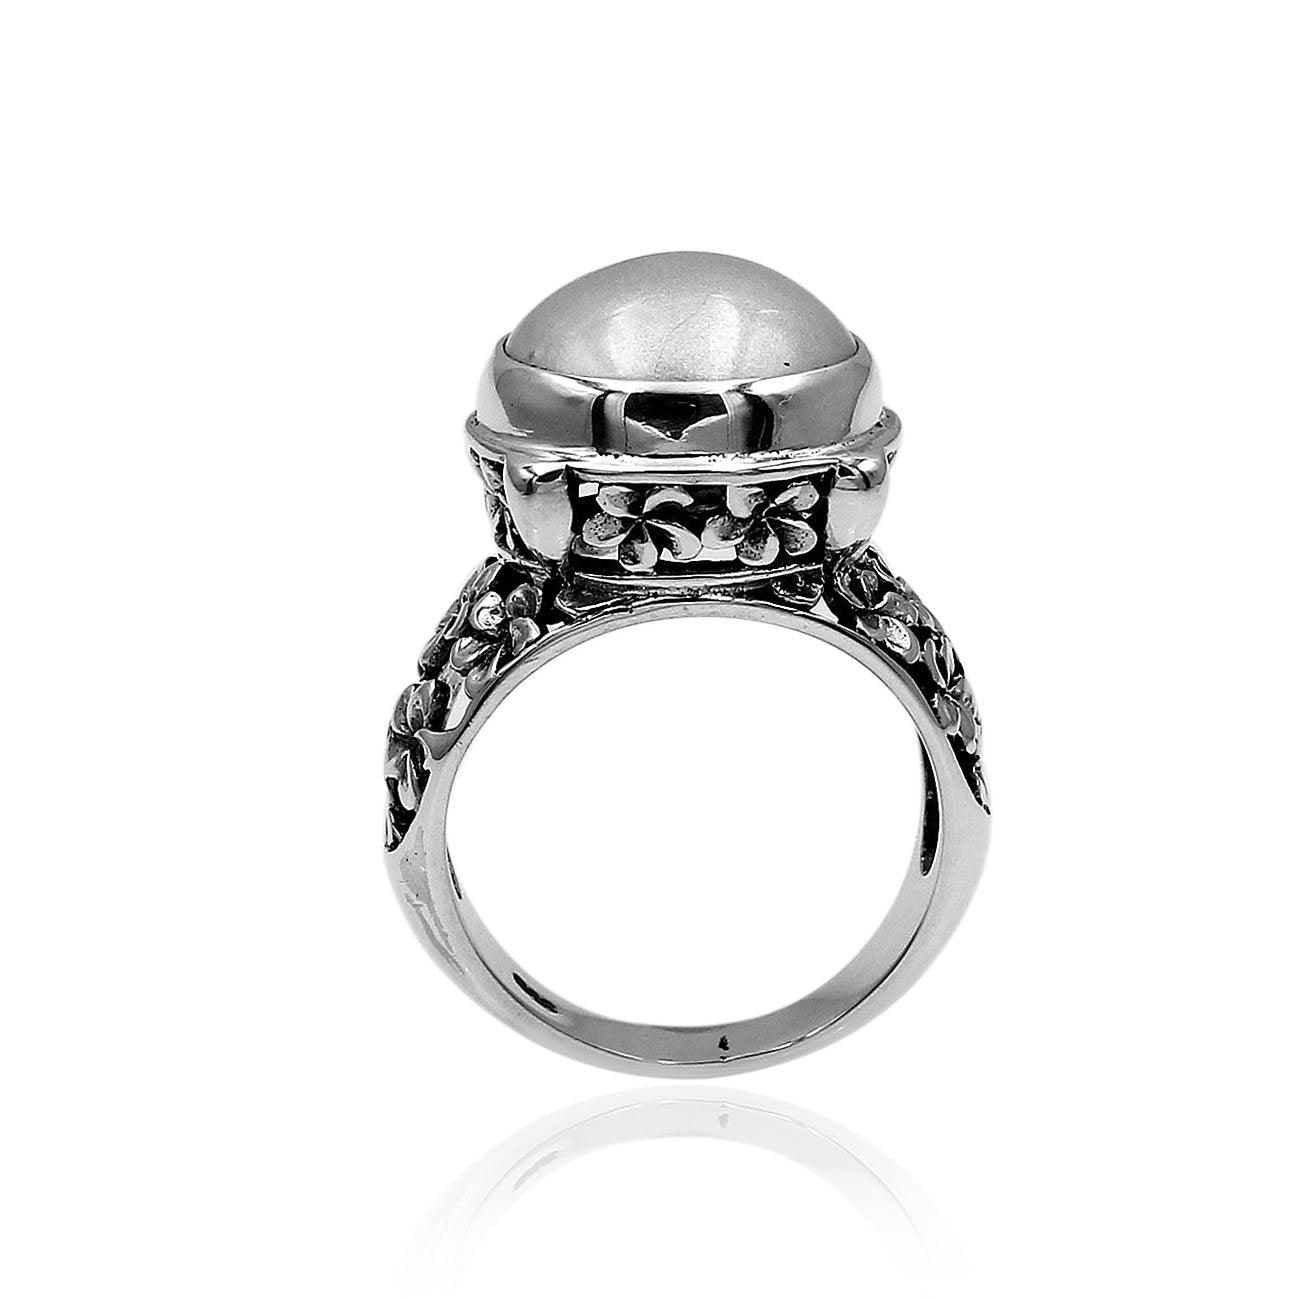 Handmade Bali Floral Fresh Water Mabe Pearl Cocktail Ring in 925 Sterling Silver - Size L , M , N , O , P , Q - Inspiring Jewellery